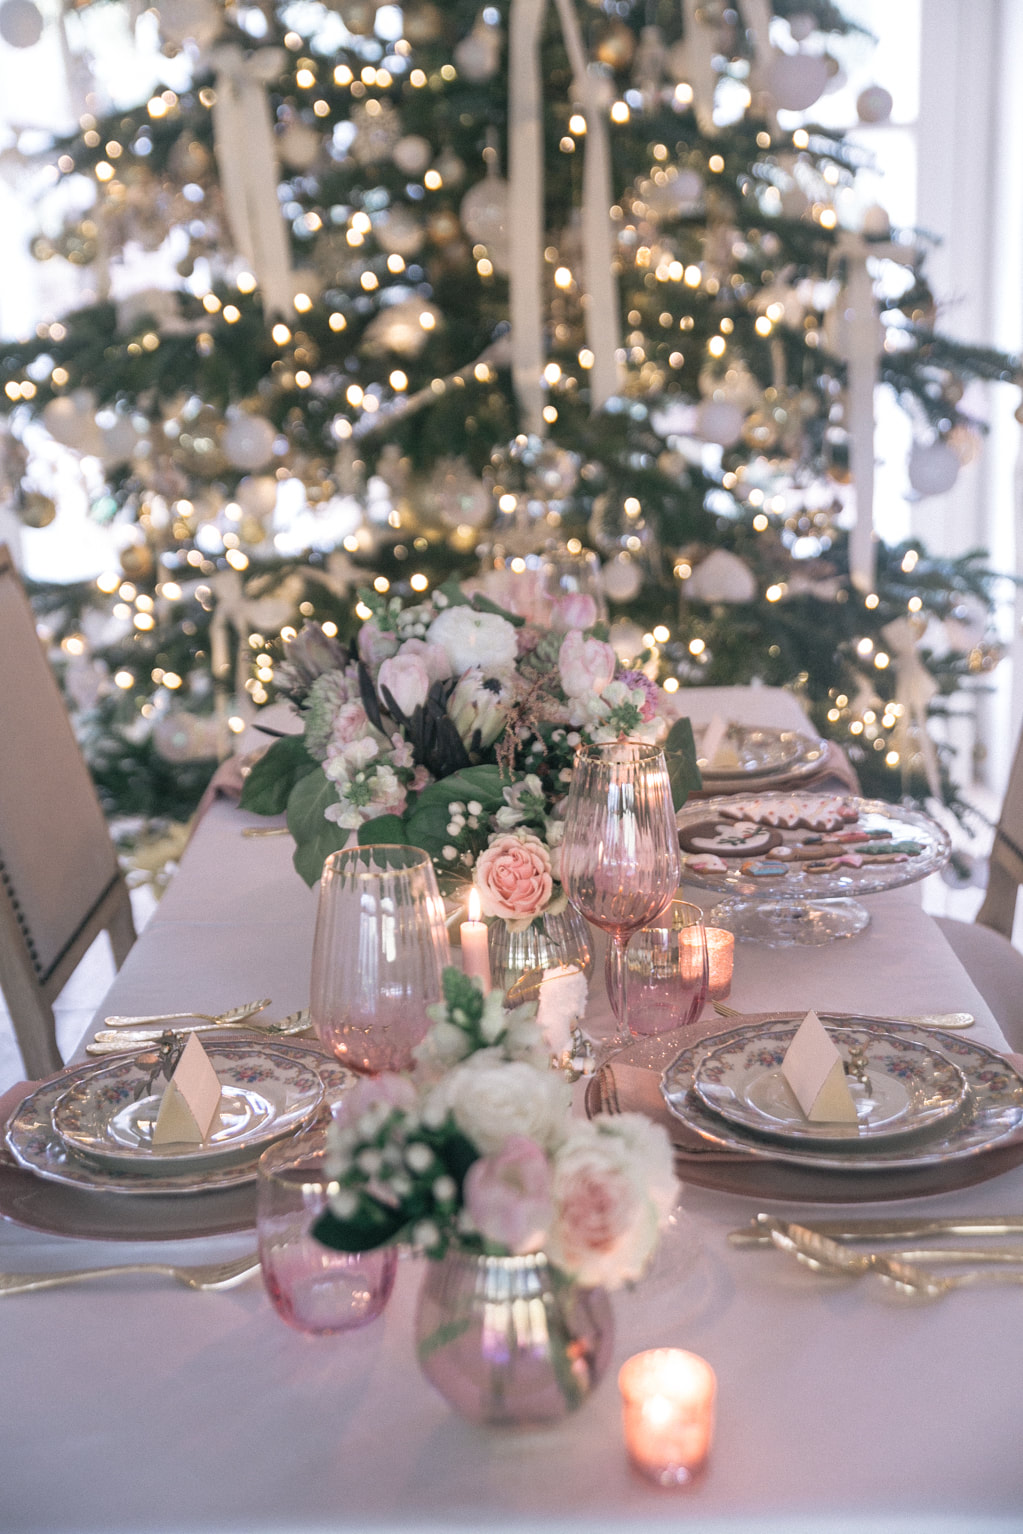 25 Winter Wedding Tips You Need to Know by The Belle Blog